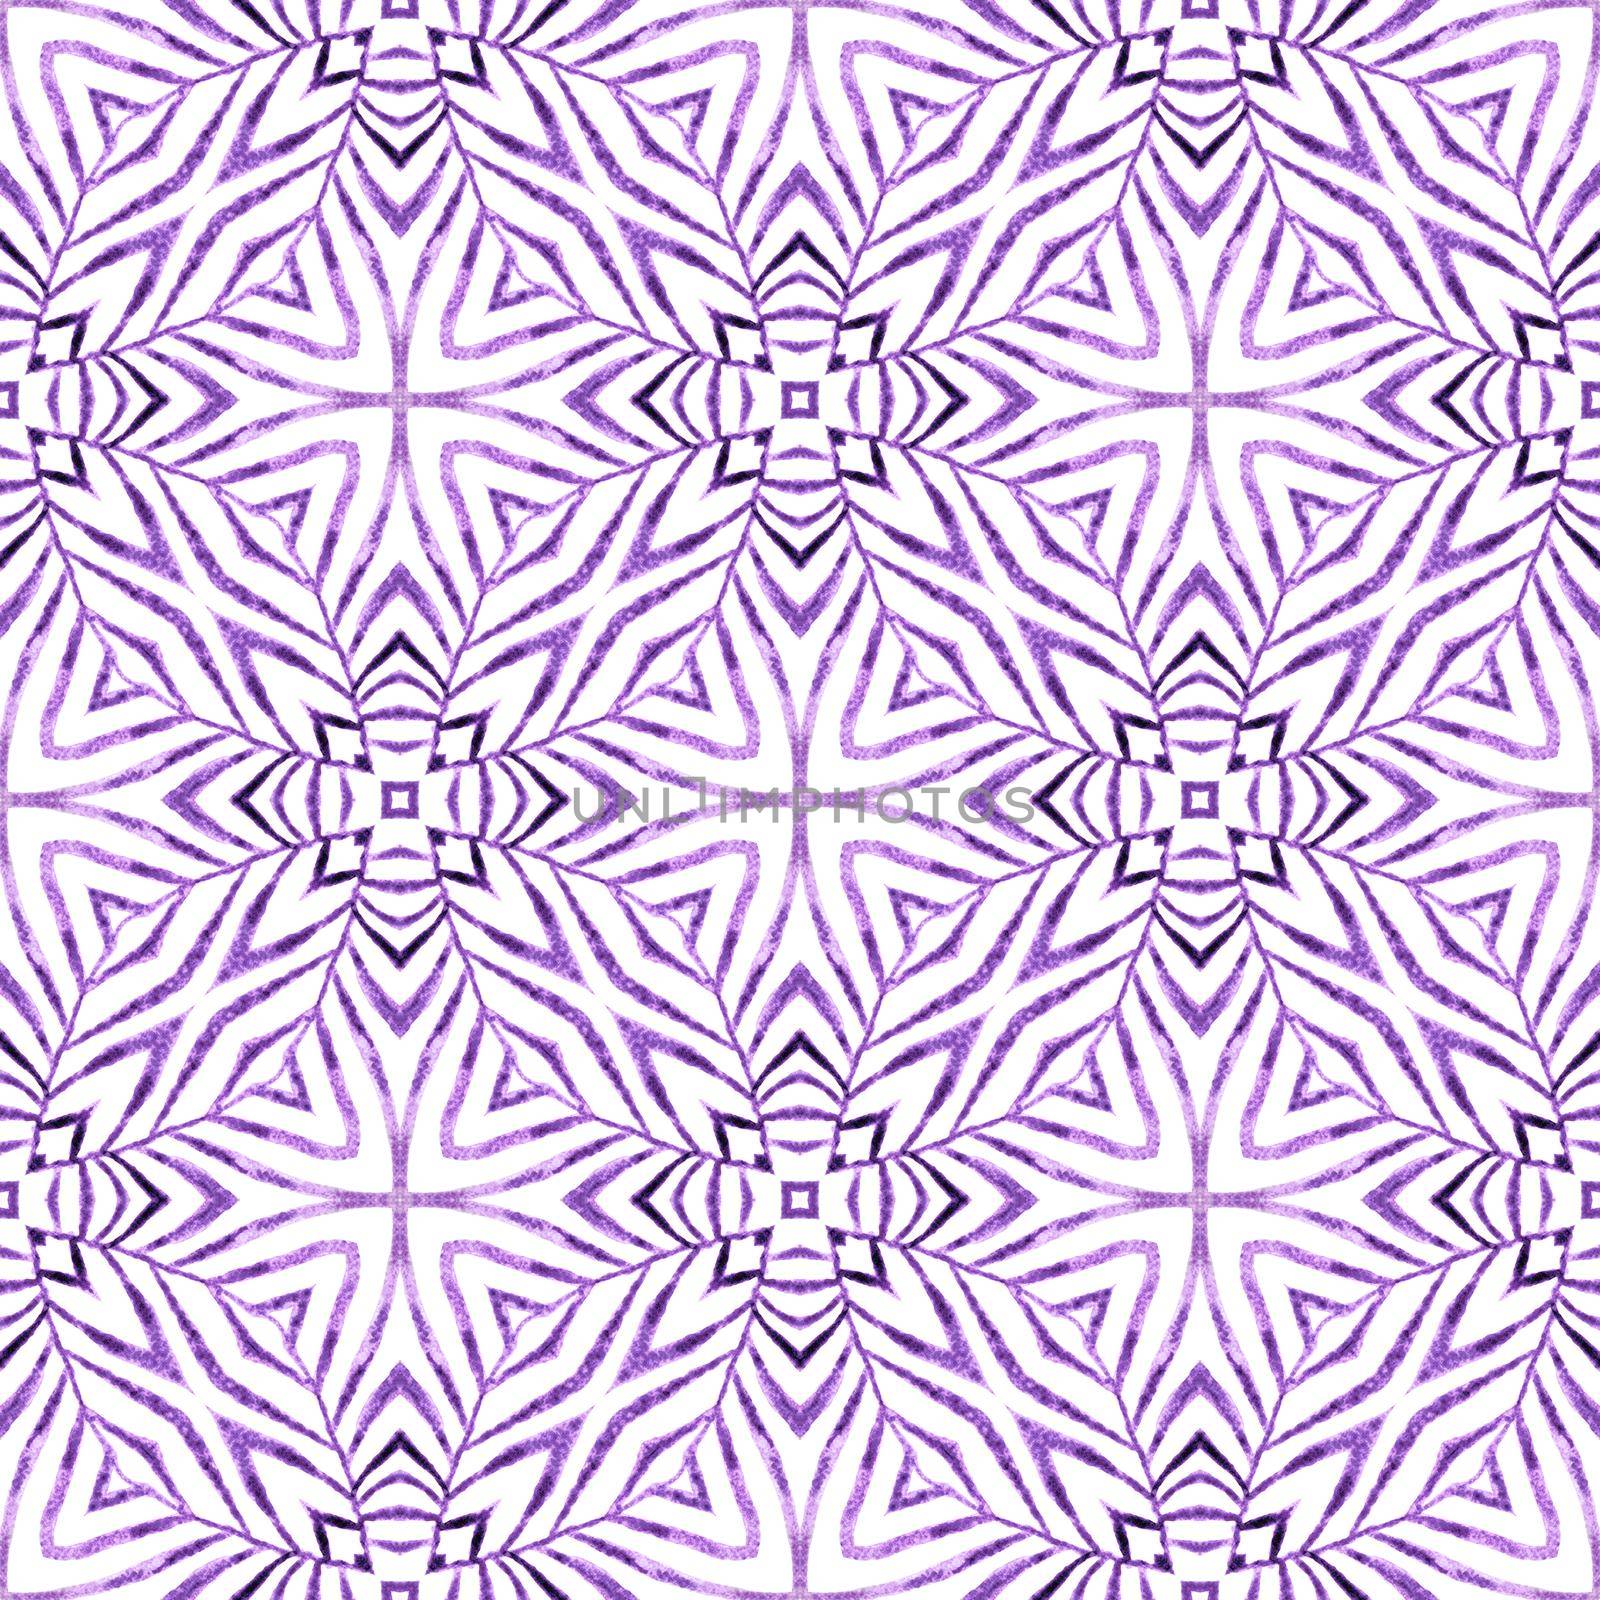 Textile ready dazzling print, swimwear fabric, wallpaper, wrapping. Purple shapely boho chic summer design. Exotic seamless pattern. Summer exotic seamless border.